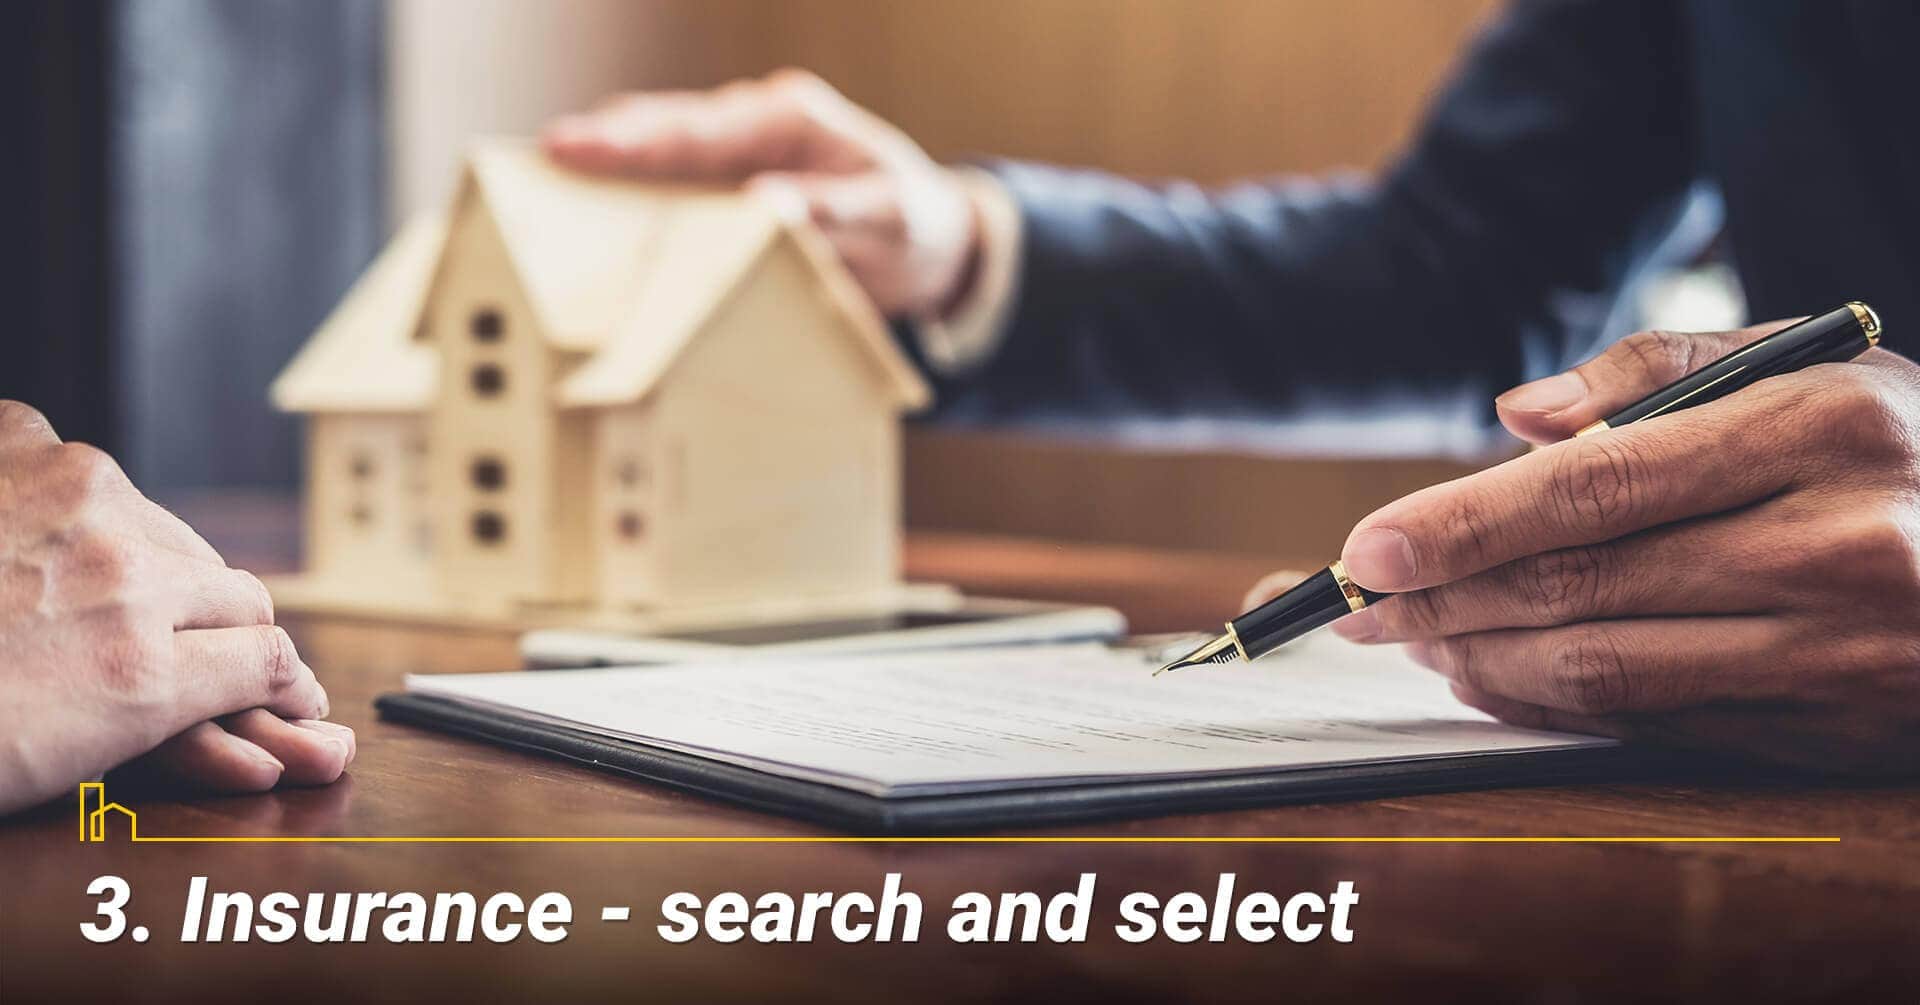 Insurance — search and select, select a good coverage for your rental property